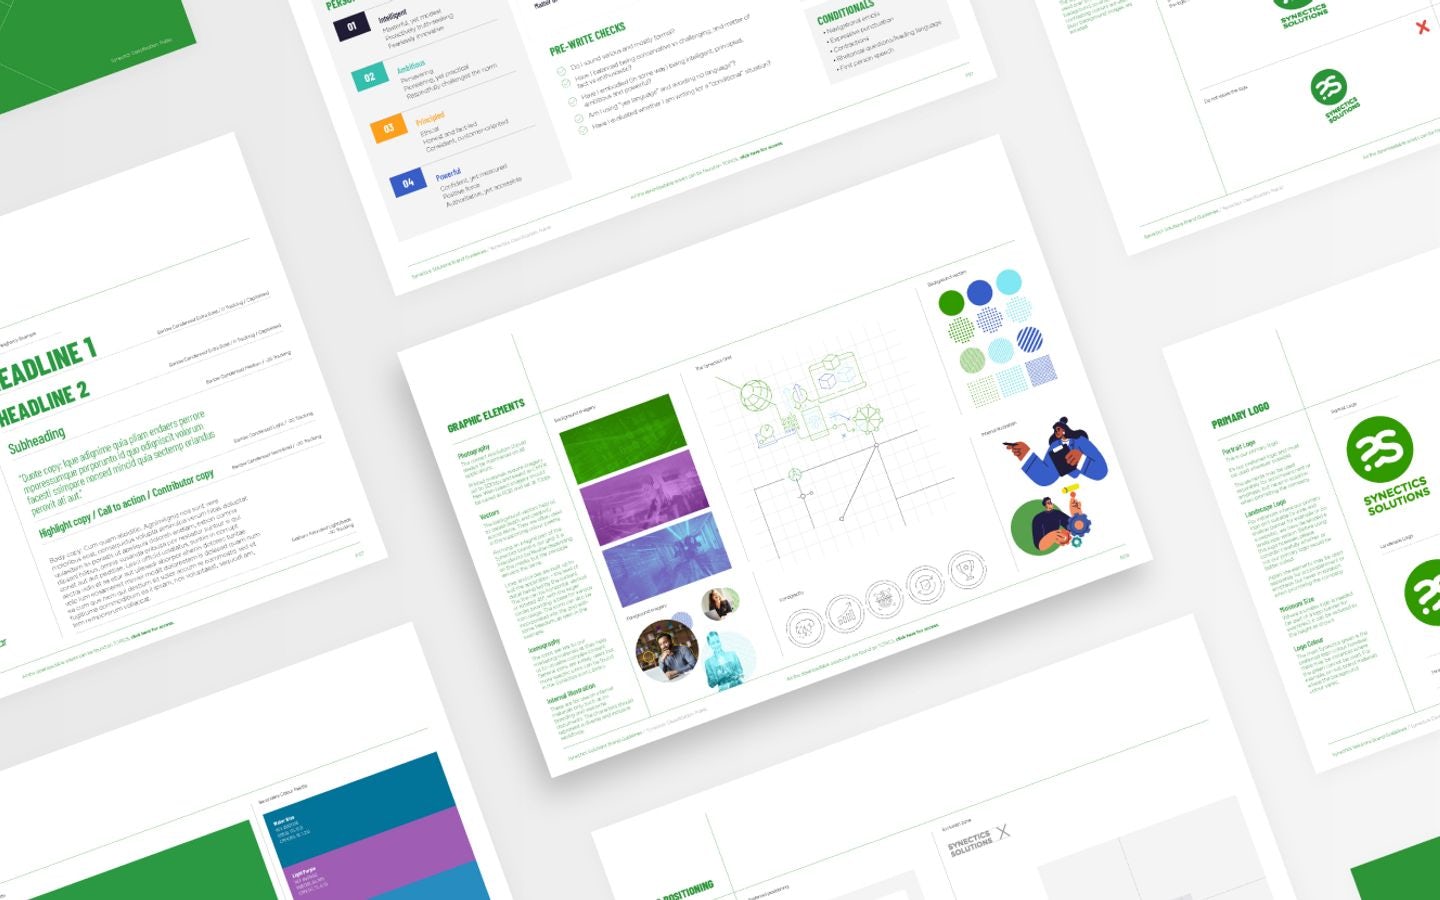 A collage of brand guideline documents for Synectics Solutions, featuring pages with green branding elements, typography specifications, logo usage and graphic elements including charts and infographics.